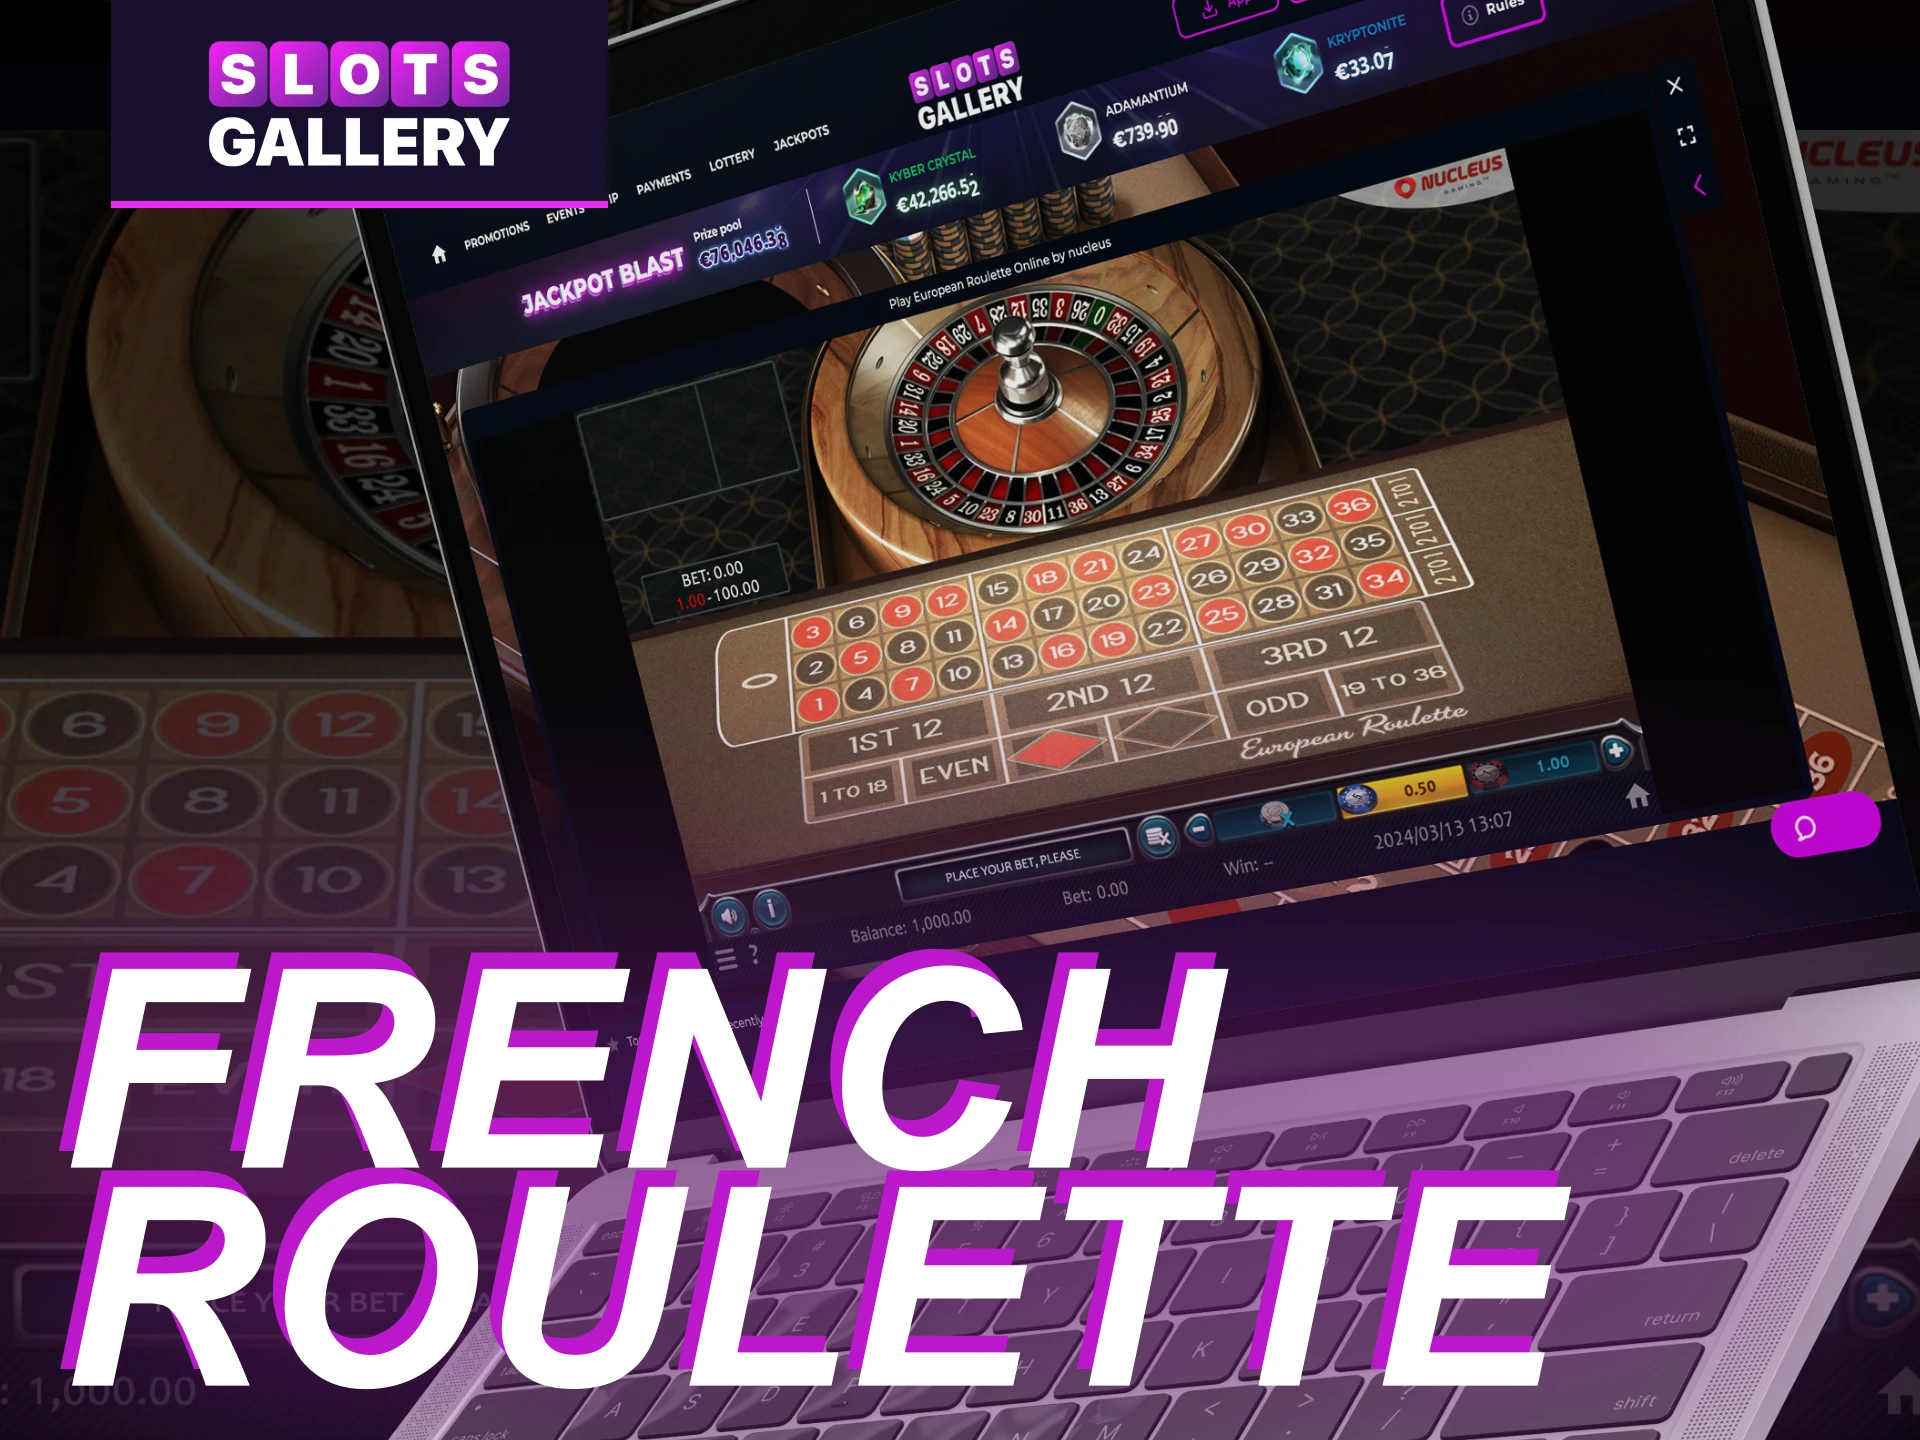 What are the rules of French roulette at the Slots Gallery online casino.